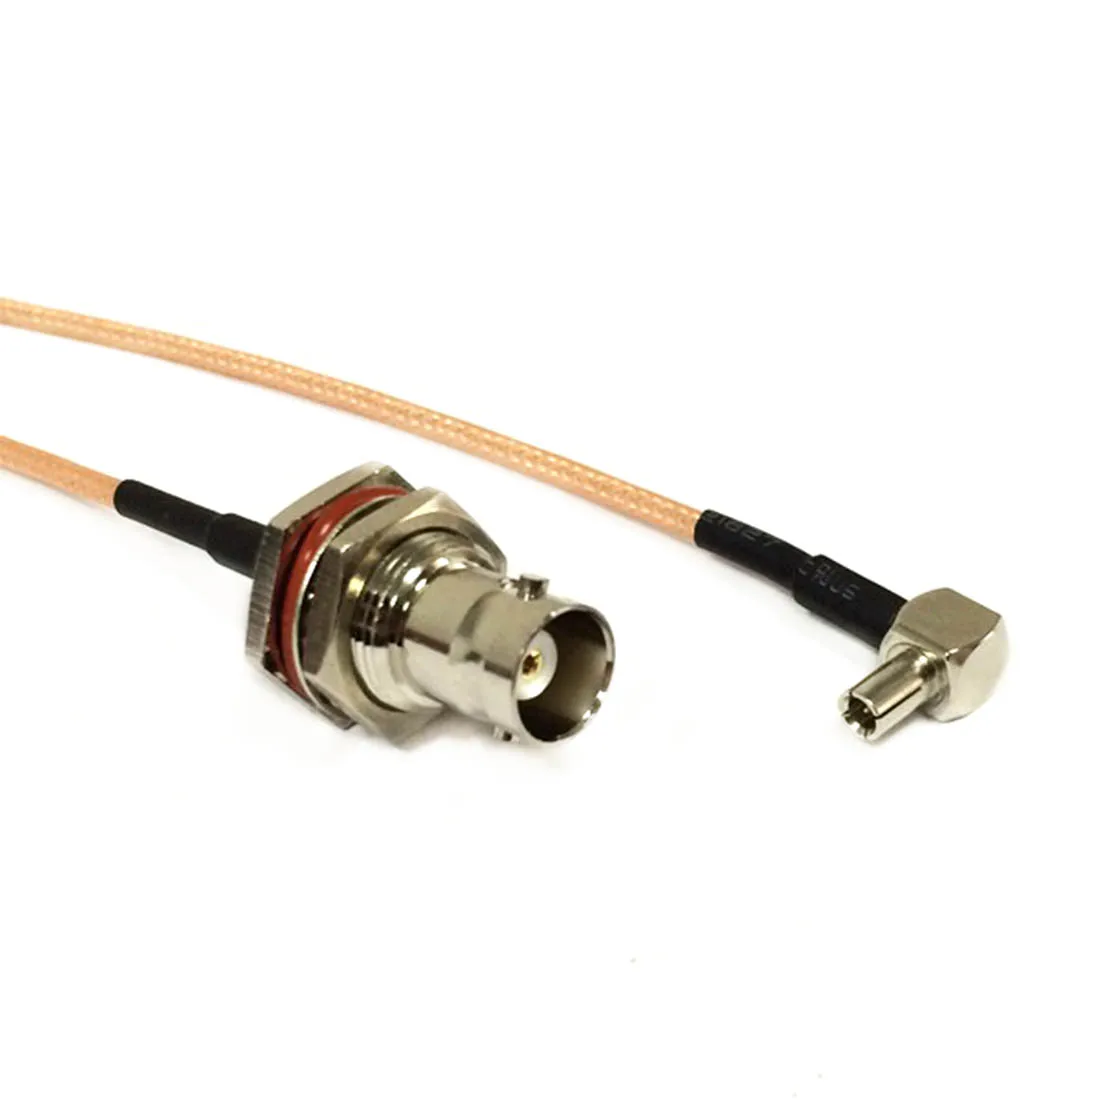 3G Antenna Cable BNC Female Jack  to TS9  Male Plug Connector RG316 Cable Pigtail 15cm 6inch Adapter RF Jumper